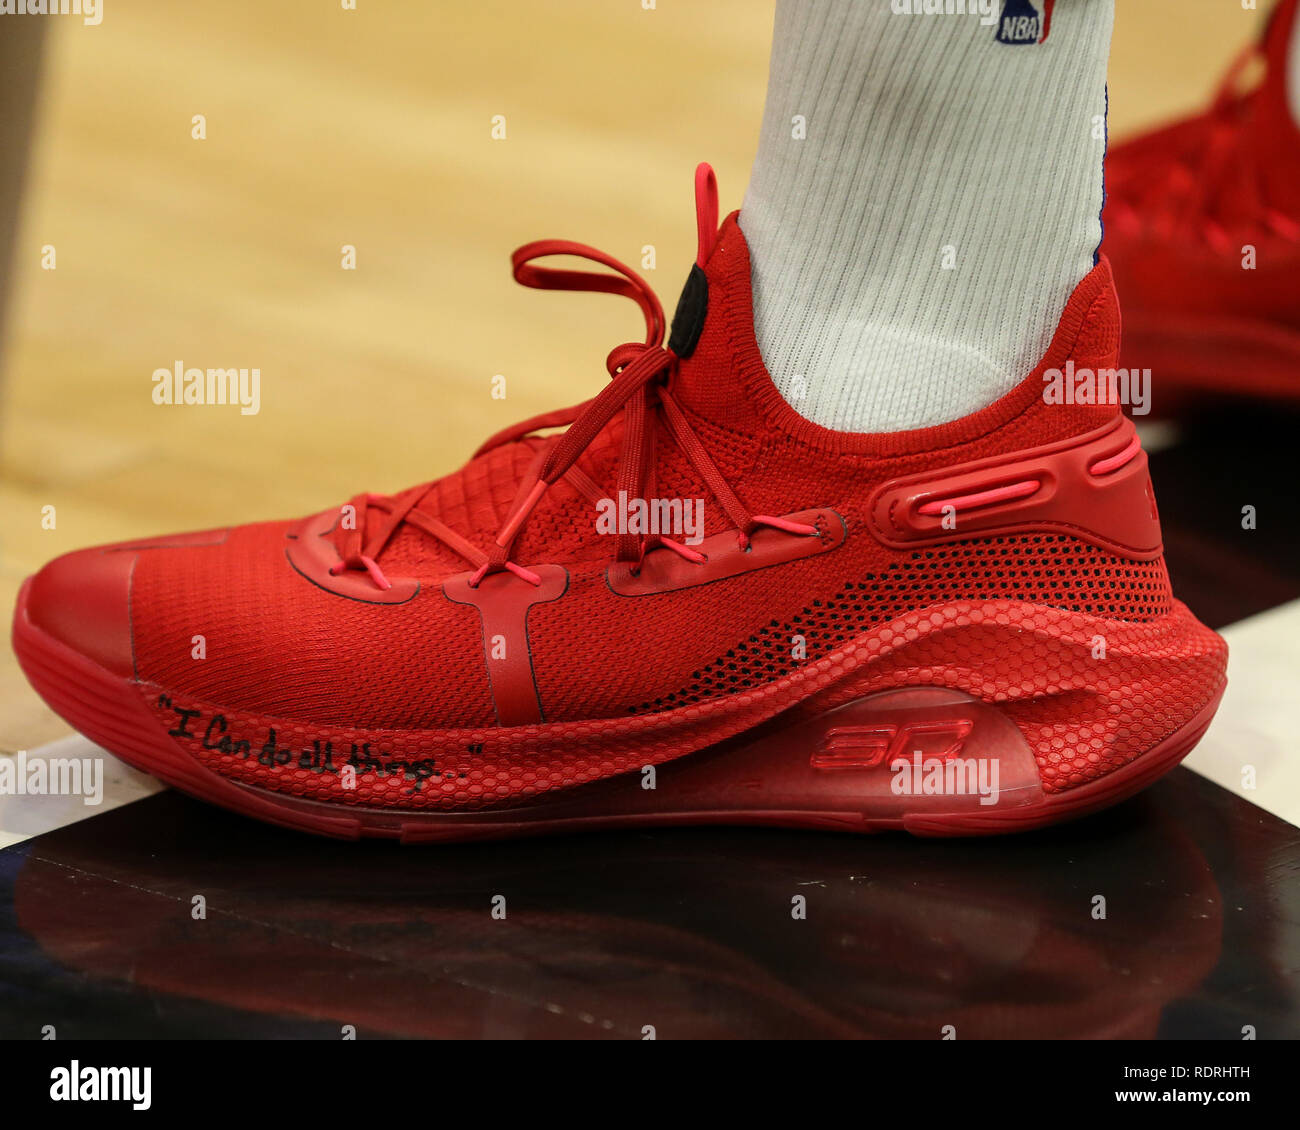 steph curry all red shoes